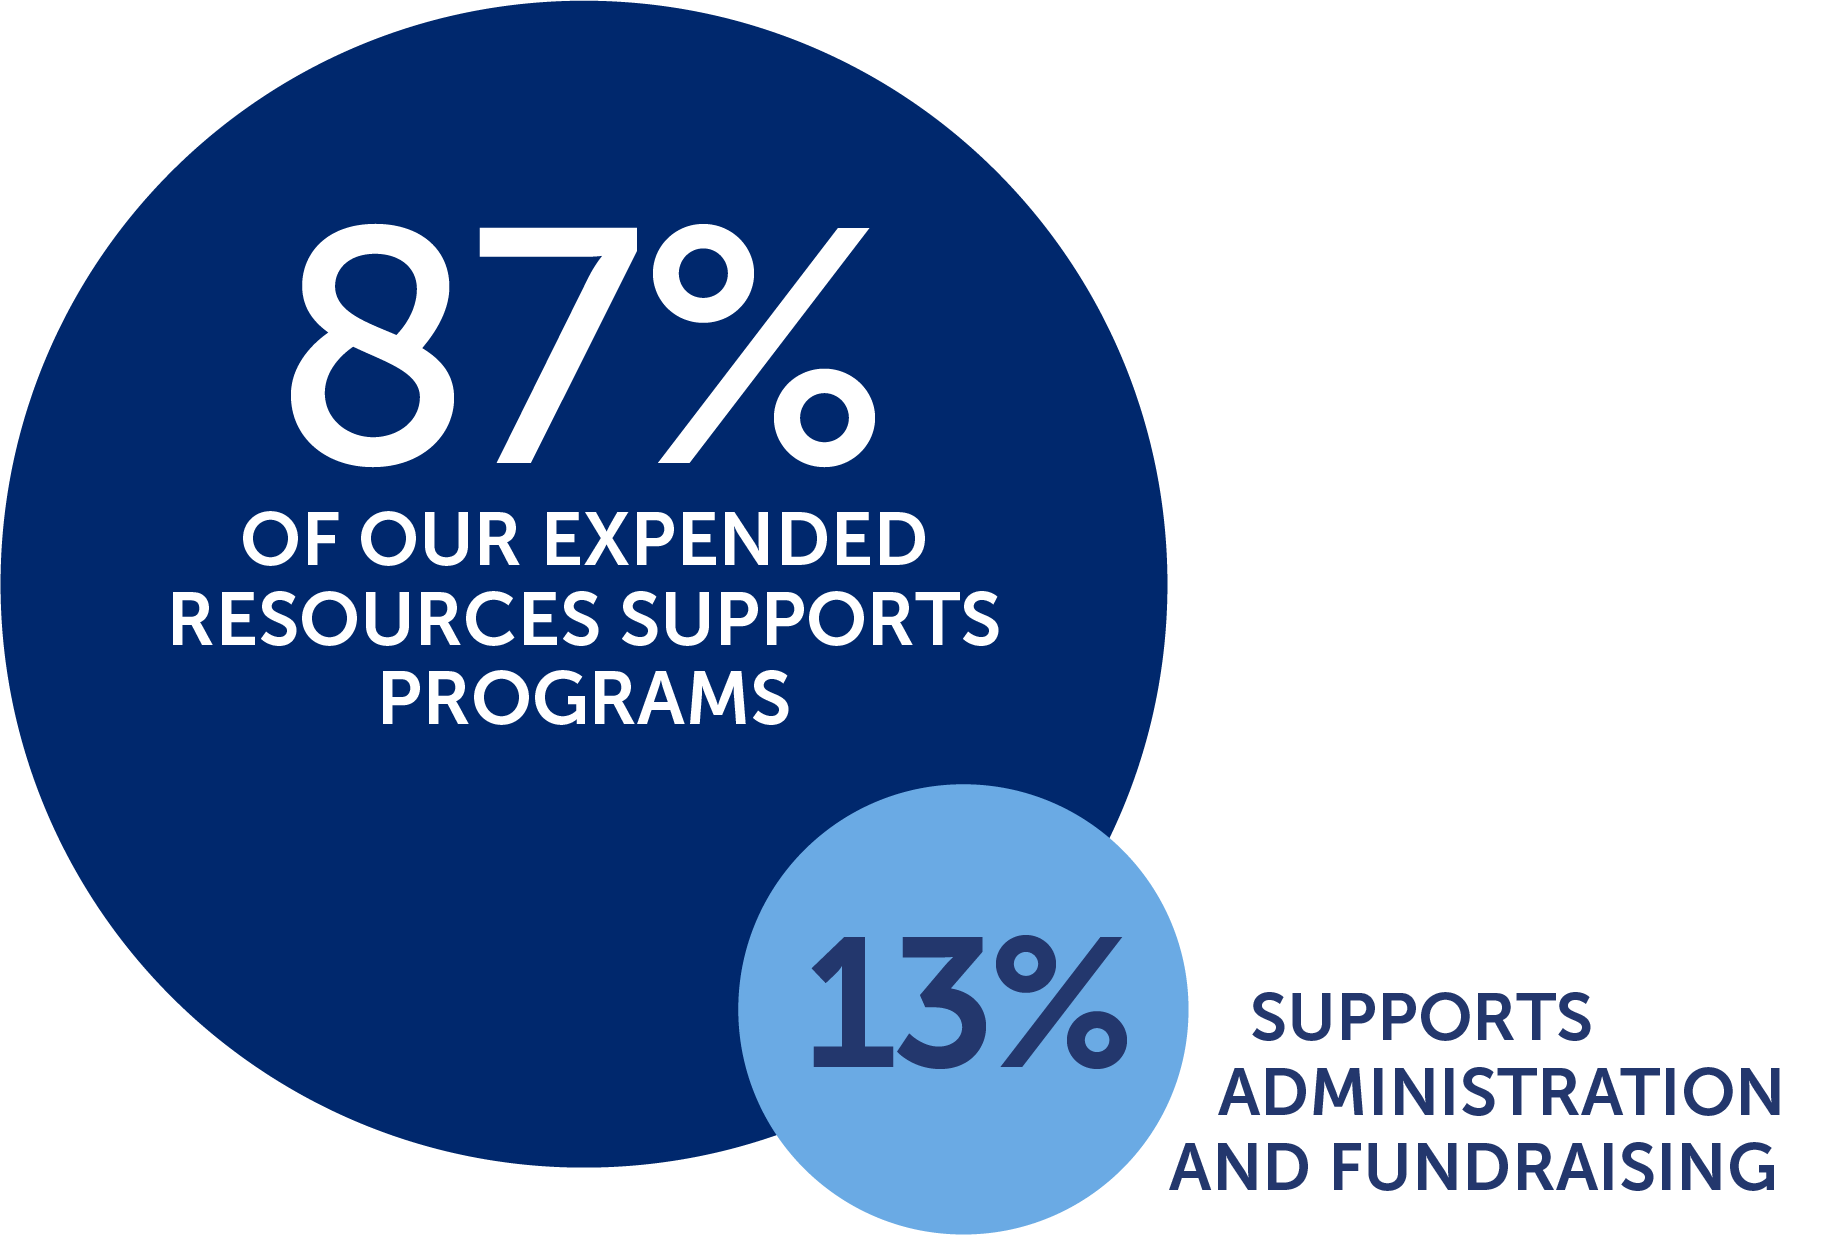 87 percent of our expended resources supports programs, 13 percent supports administration and fundraising